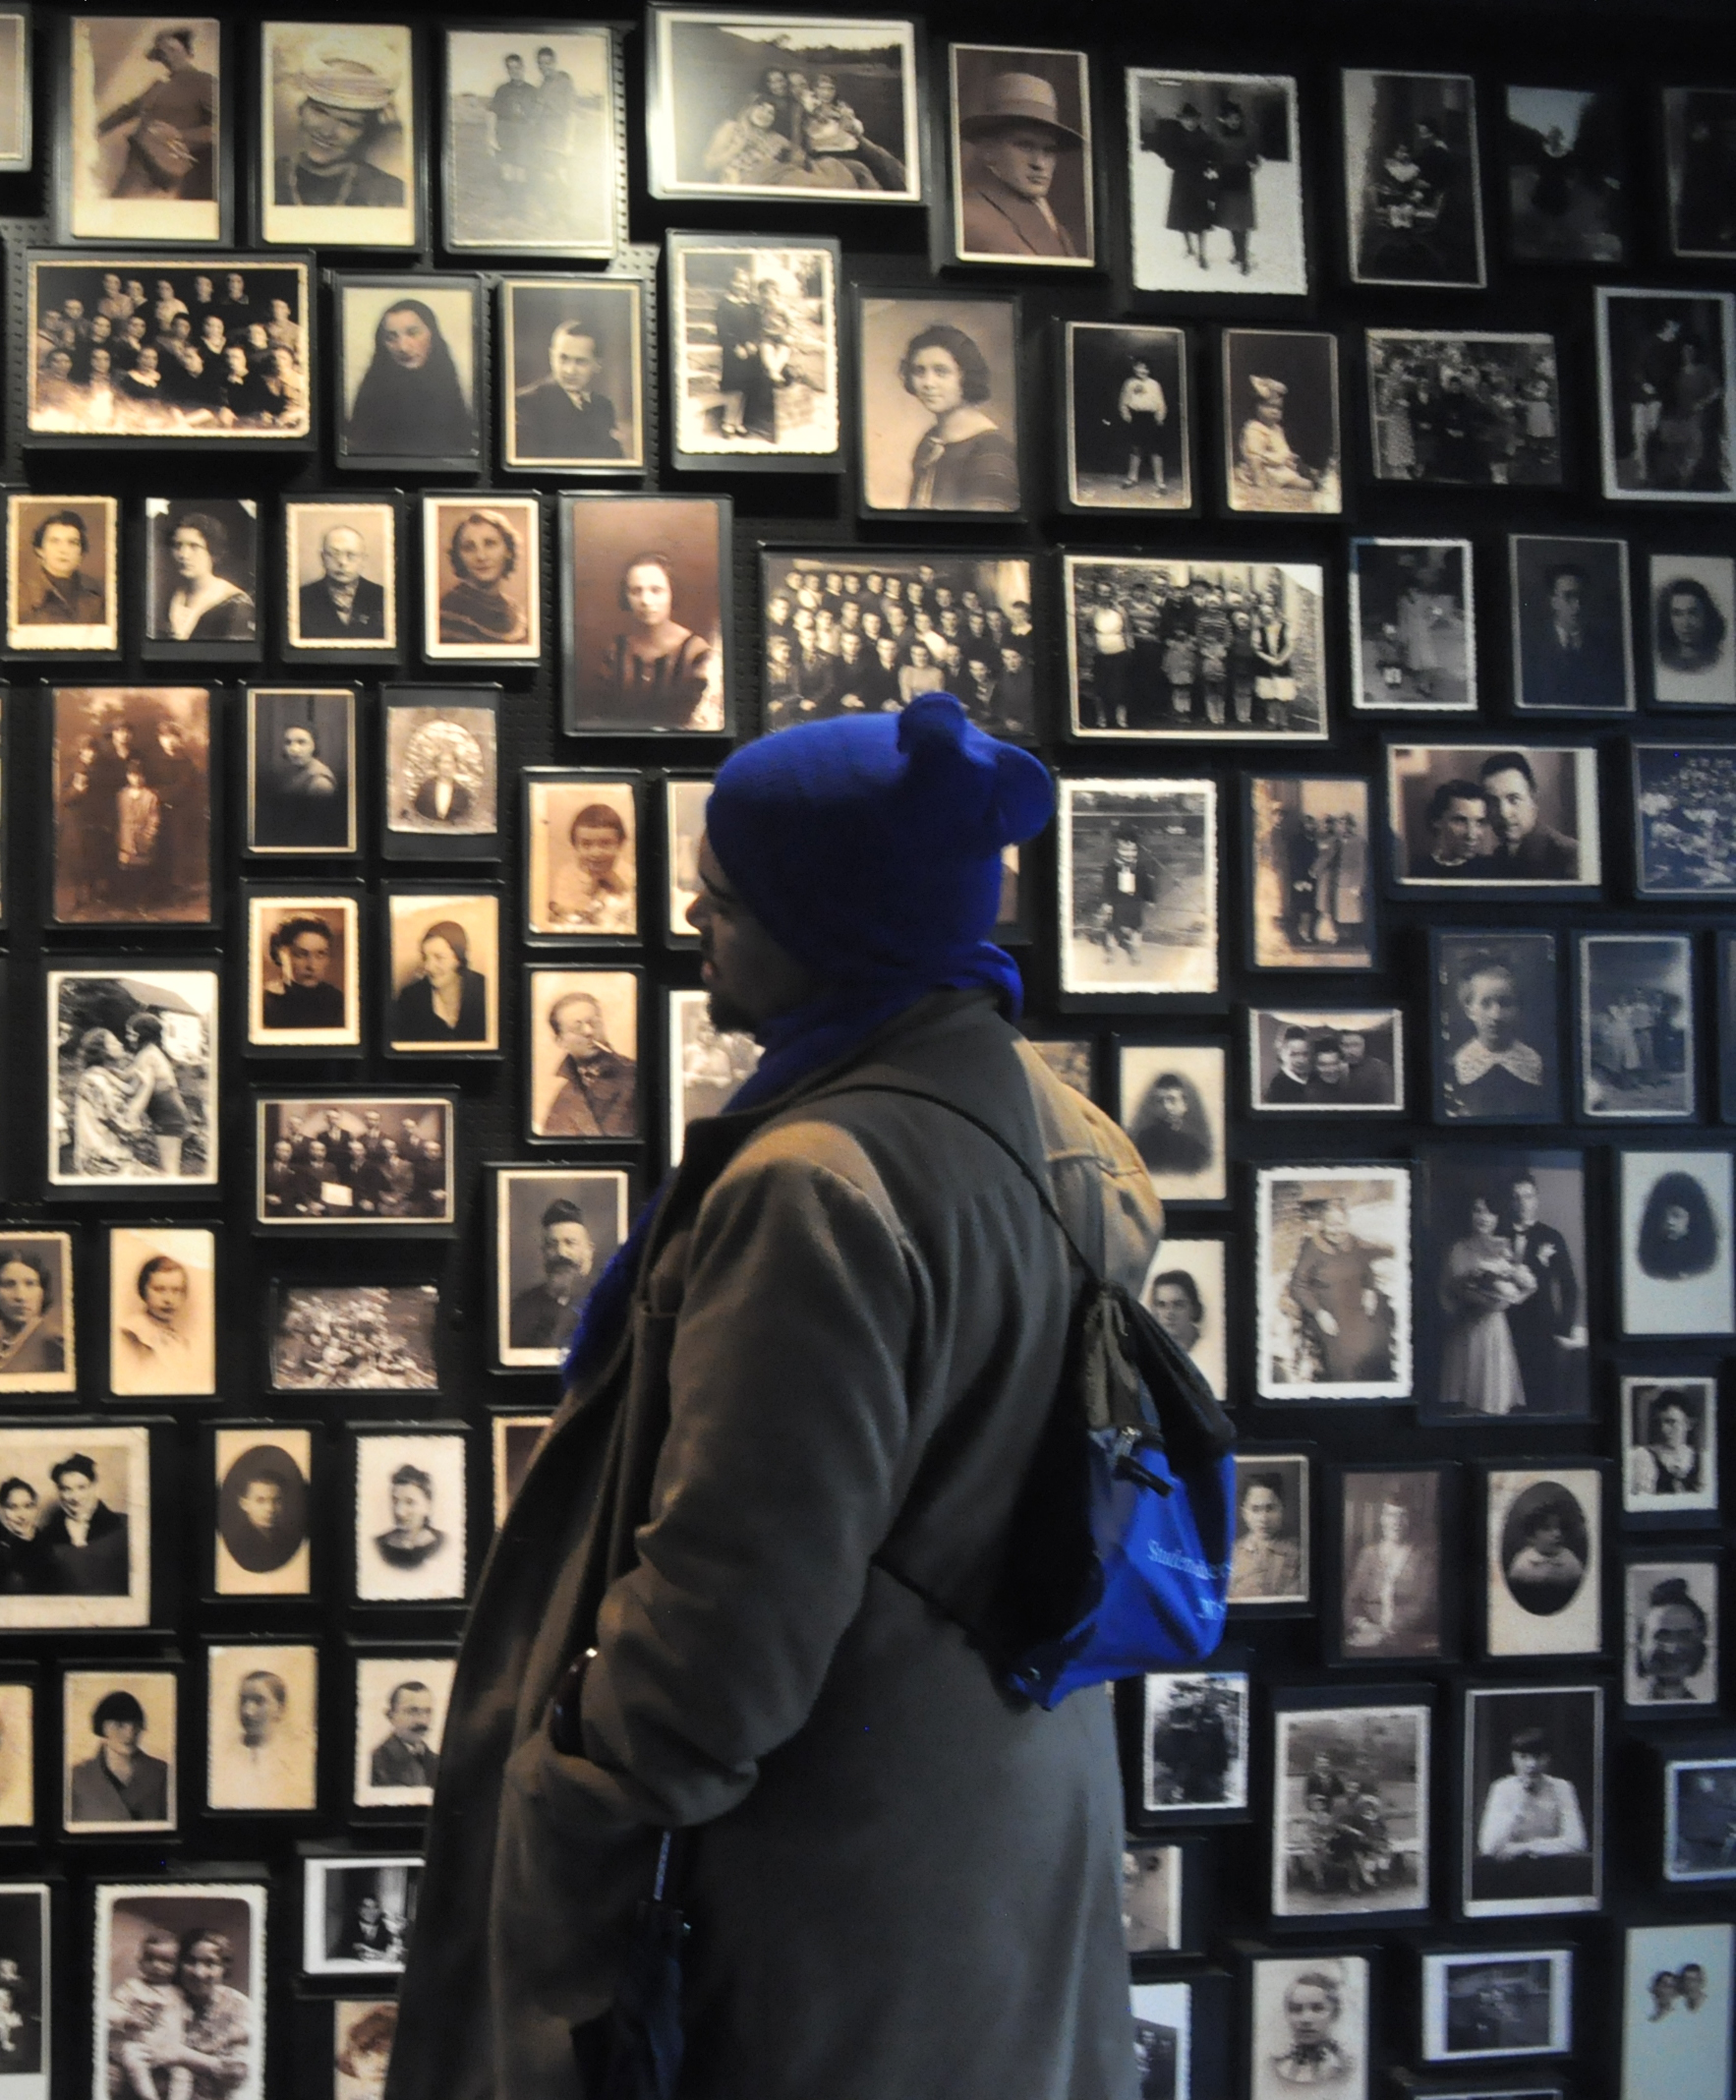 Study tour participant Shannon Cupido looking at pre-Holocaust images of people imprisoned and murdered at Auschwitz-Birkenau.